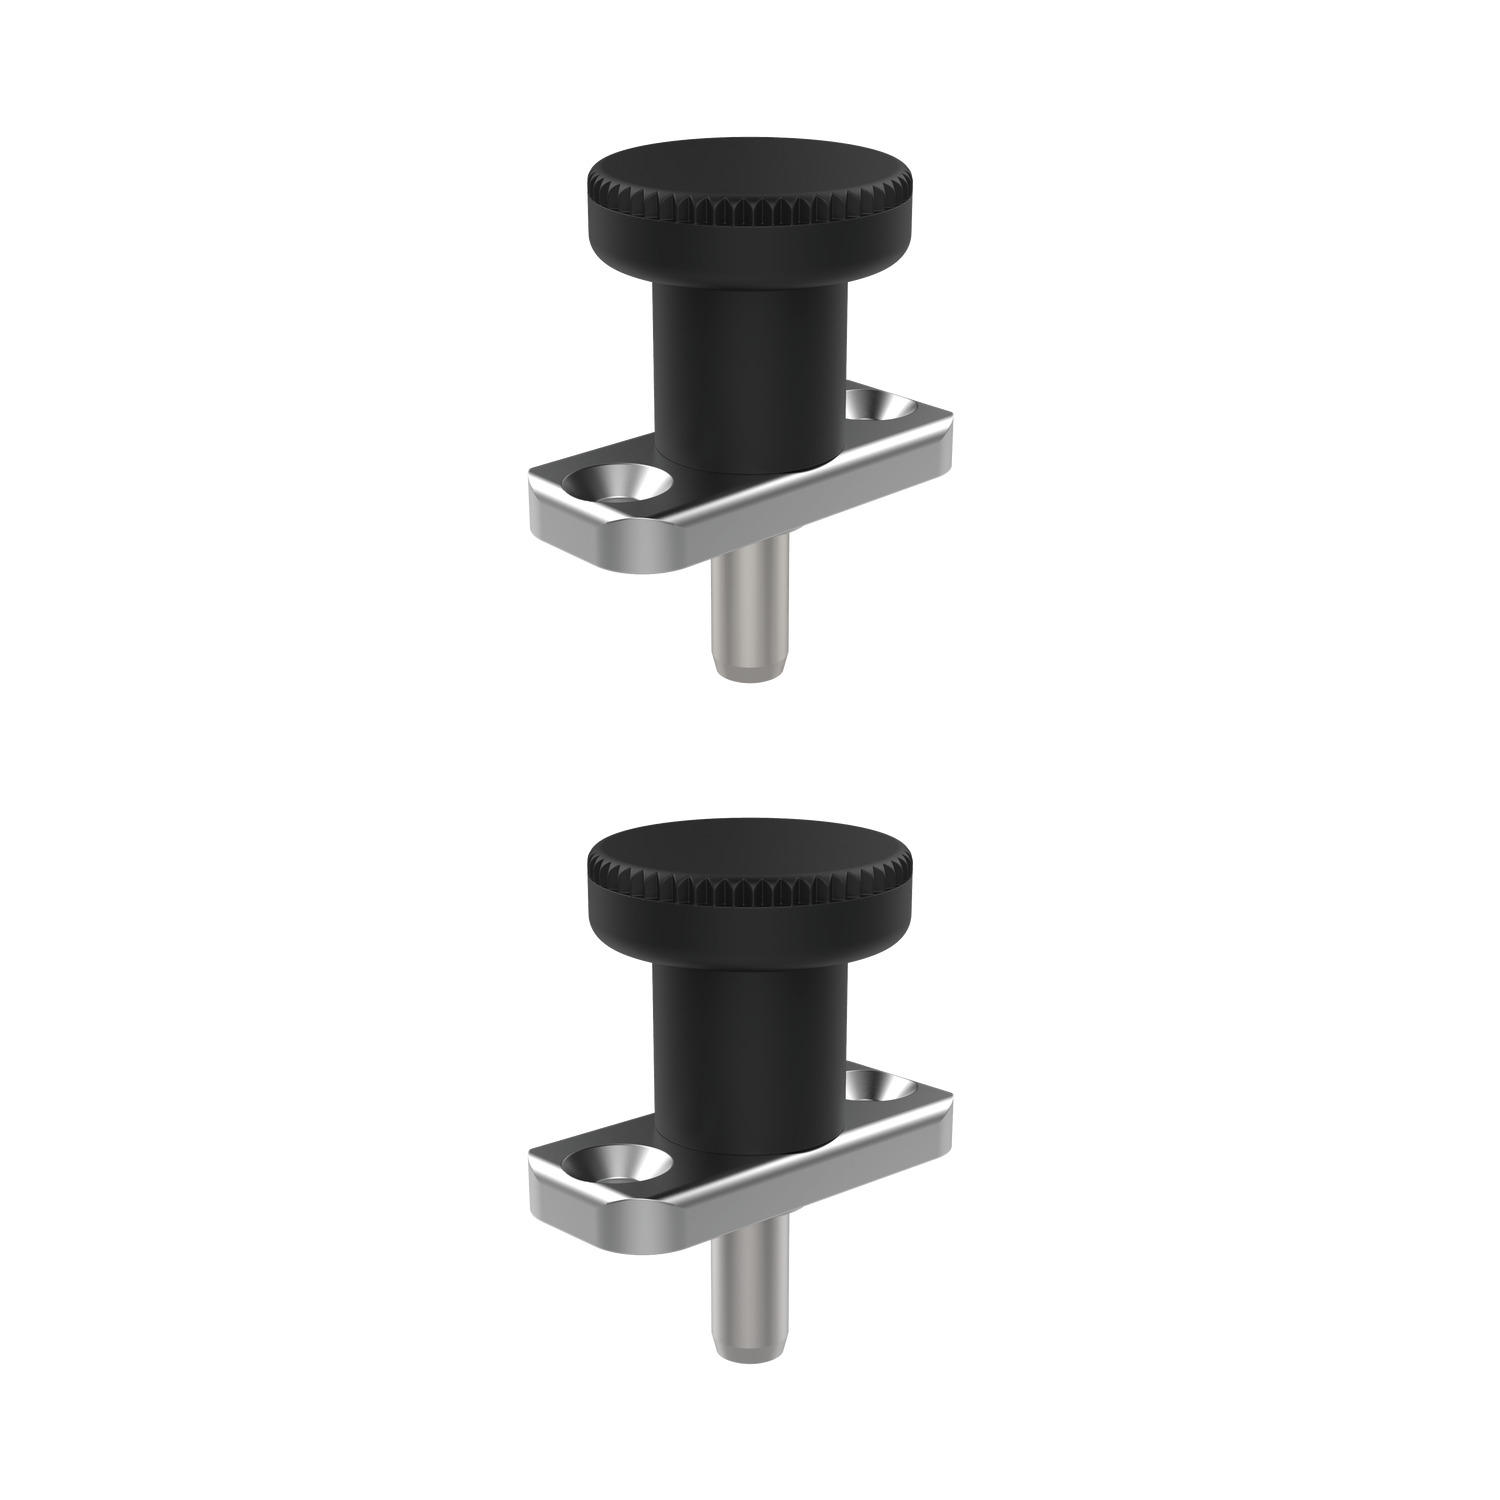 Index Plunger - Pull Grip Pull grip index plunger with flange mounting. Available in steel or stainless steel. Locking and non-locking options available. 